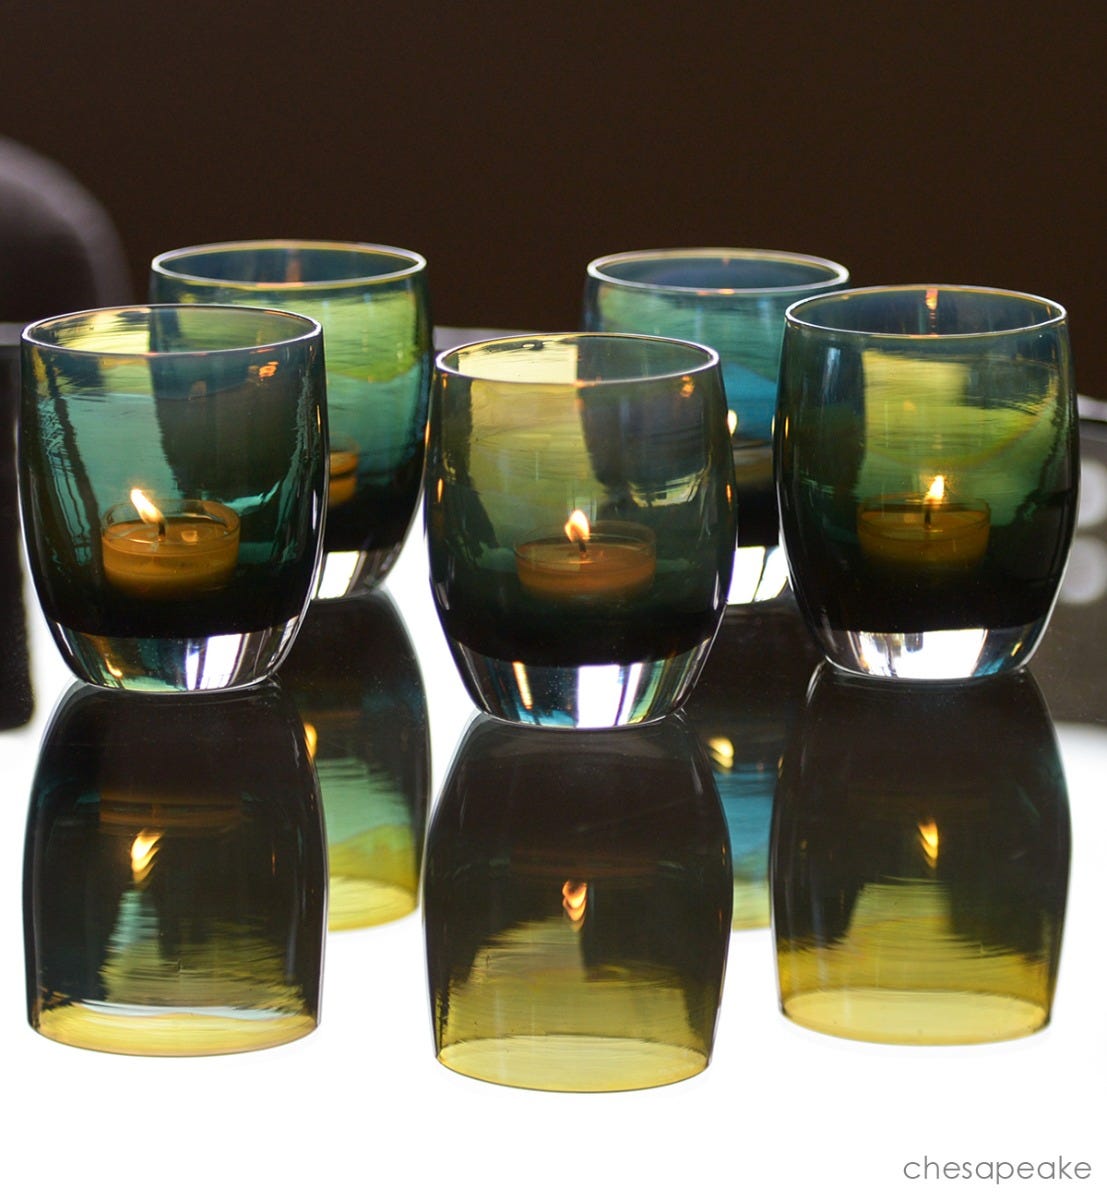 chesapeake dark green with touch of yellow hand-blown glass votive candle holder.